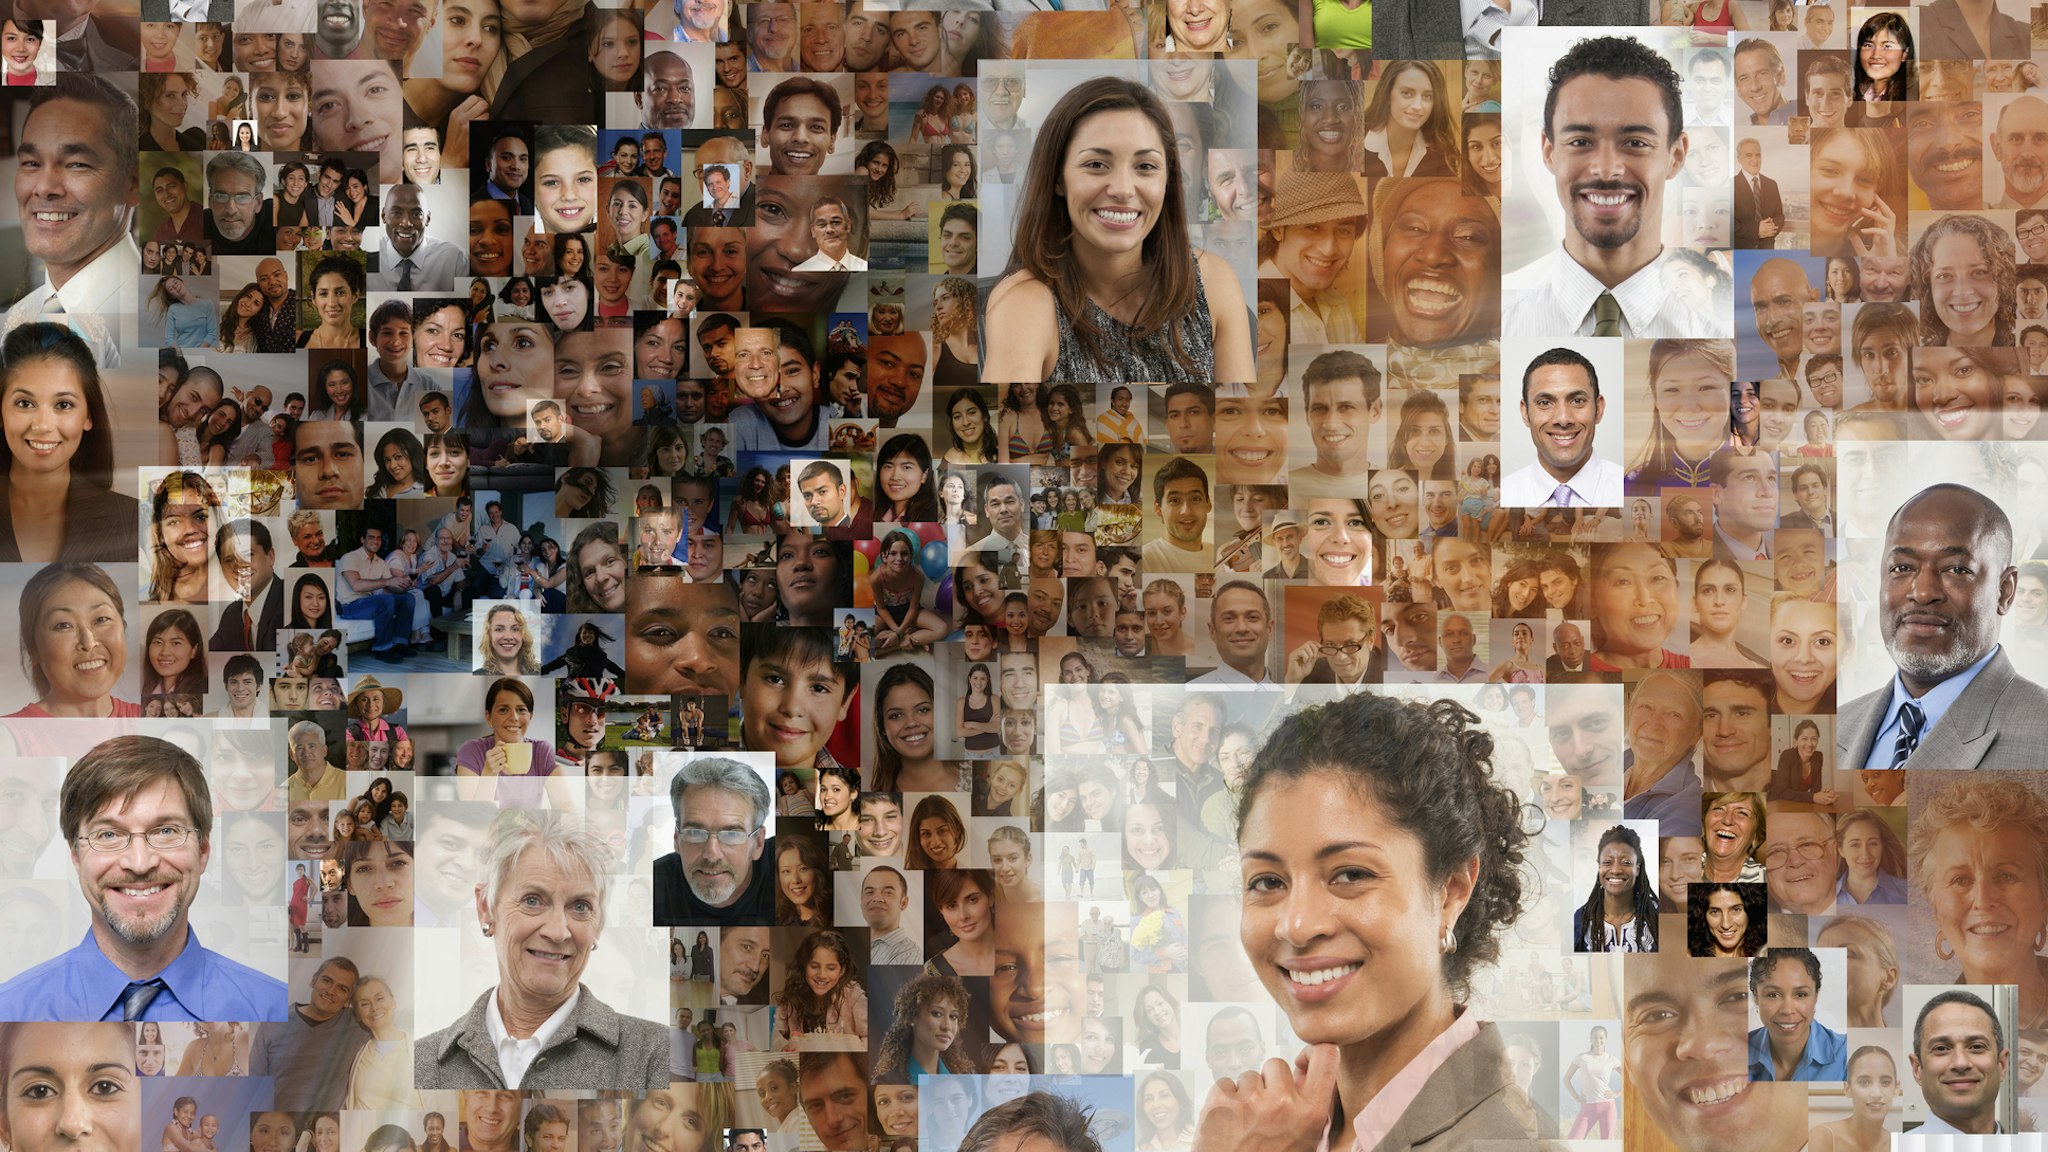 Collage of faces of business people - stock photo